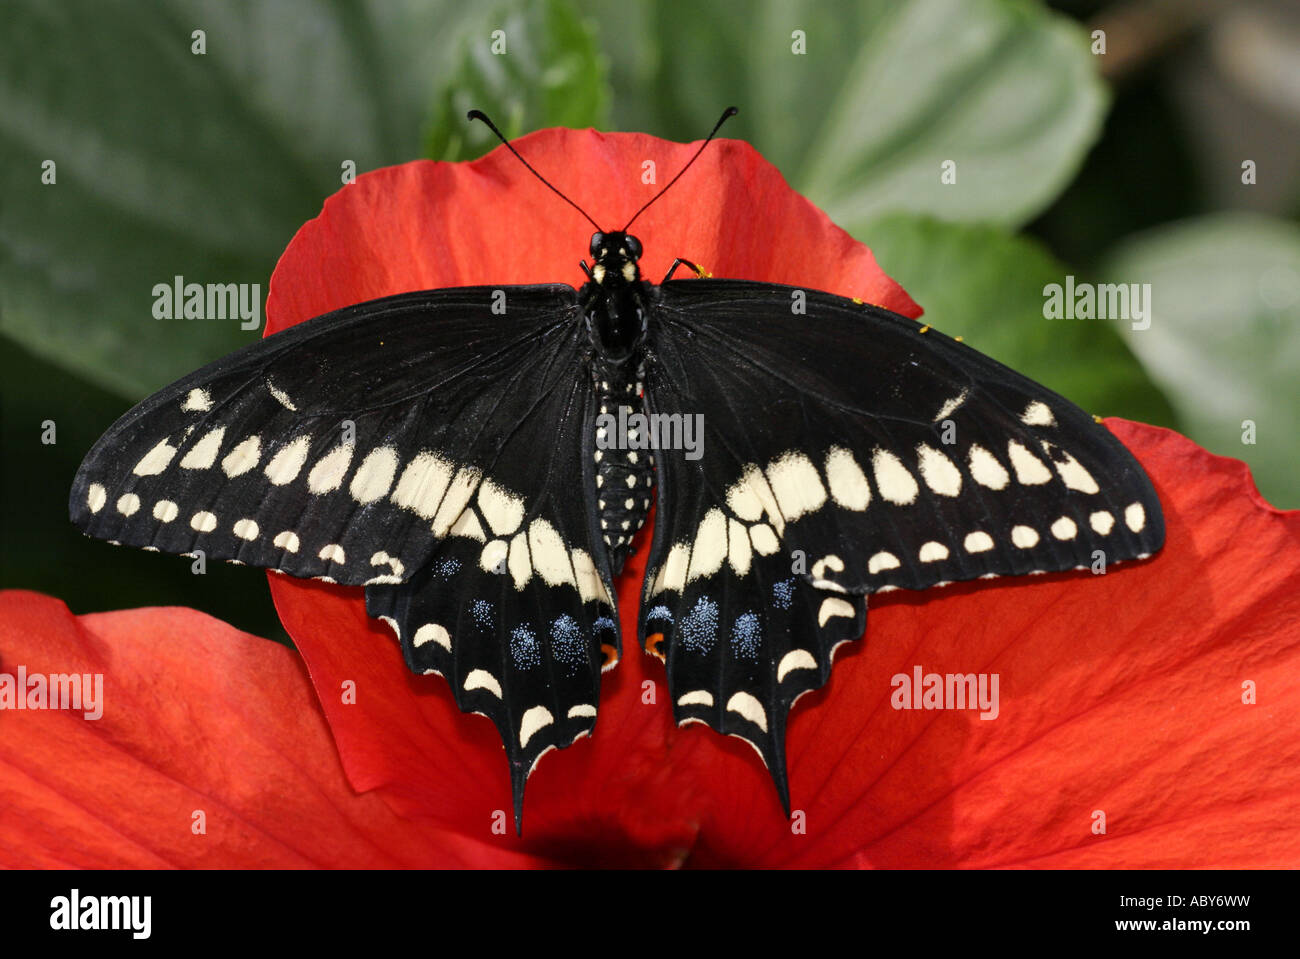 Black Swallowtail butterfly on red  hibiscus flower Stock Photo